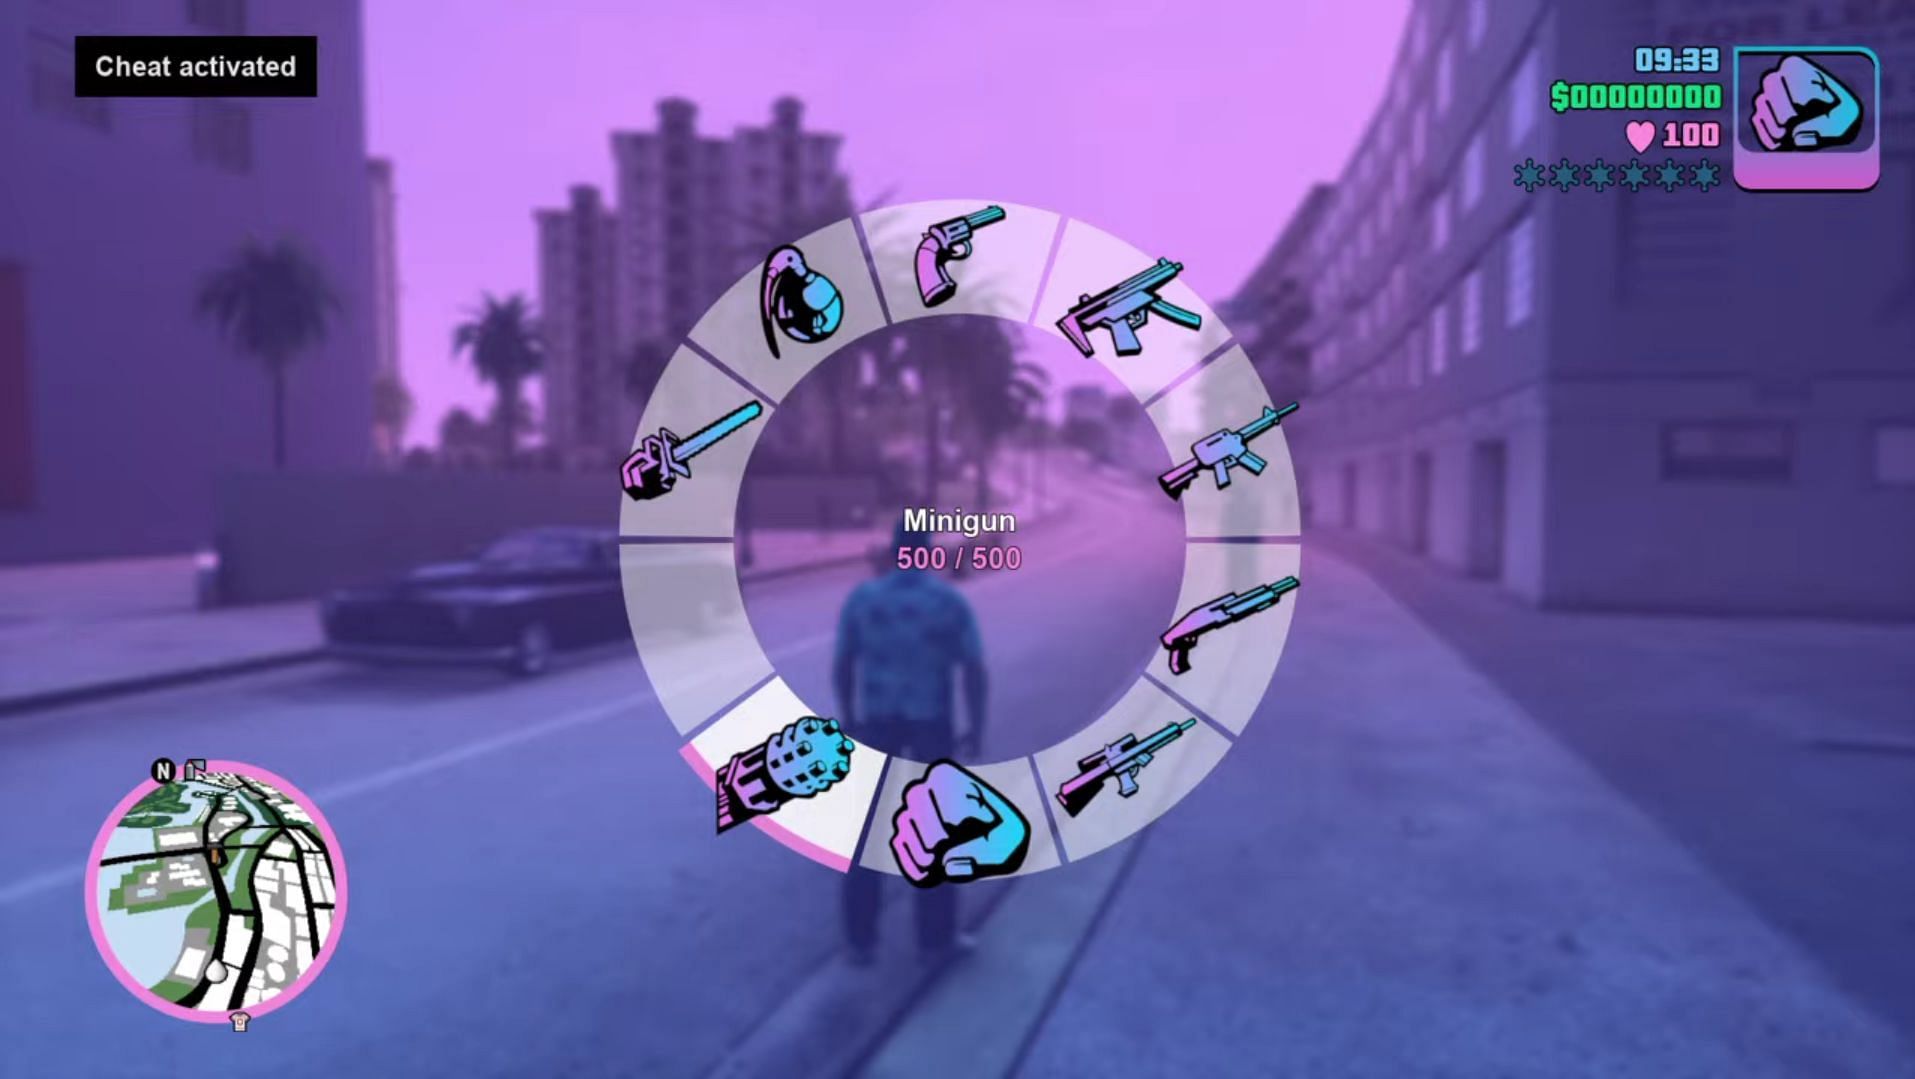 How the Weapon Wheel looks like in-game (Image via Rockstar Games)